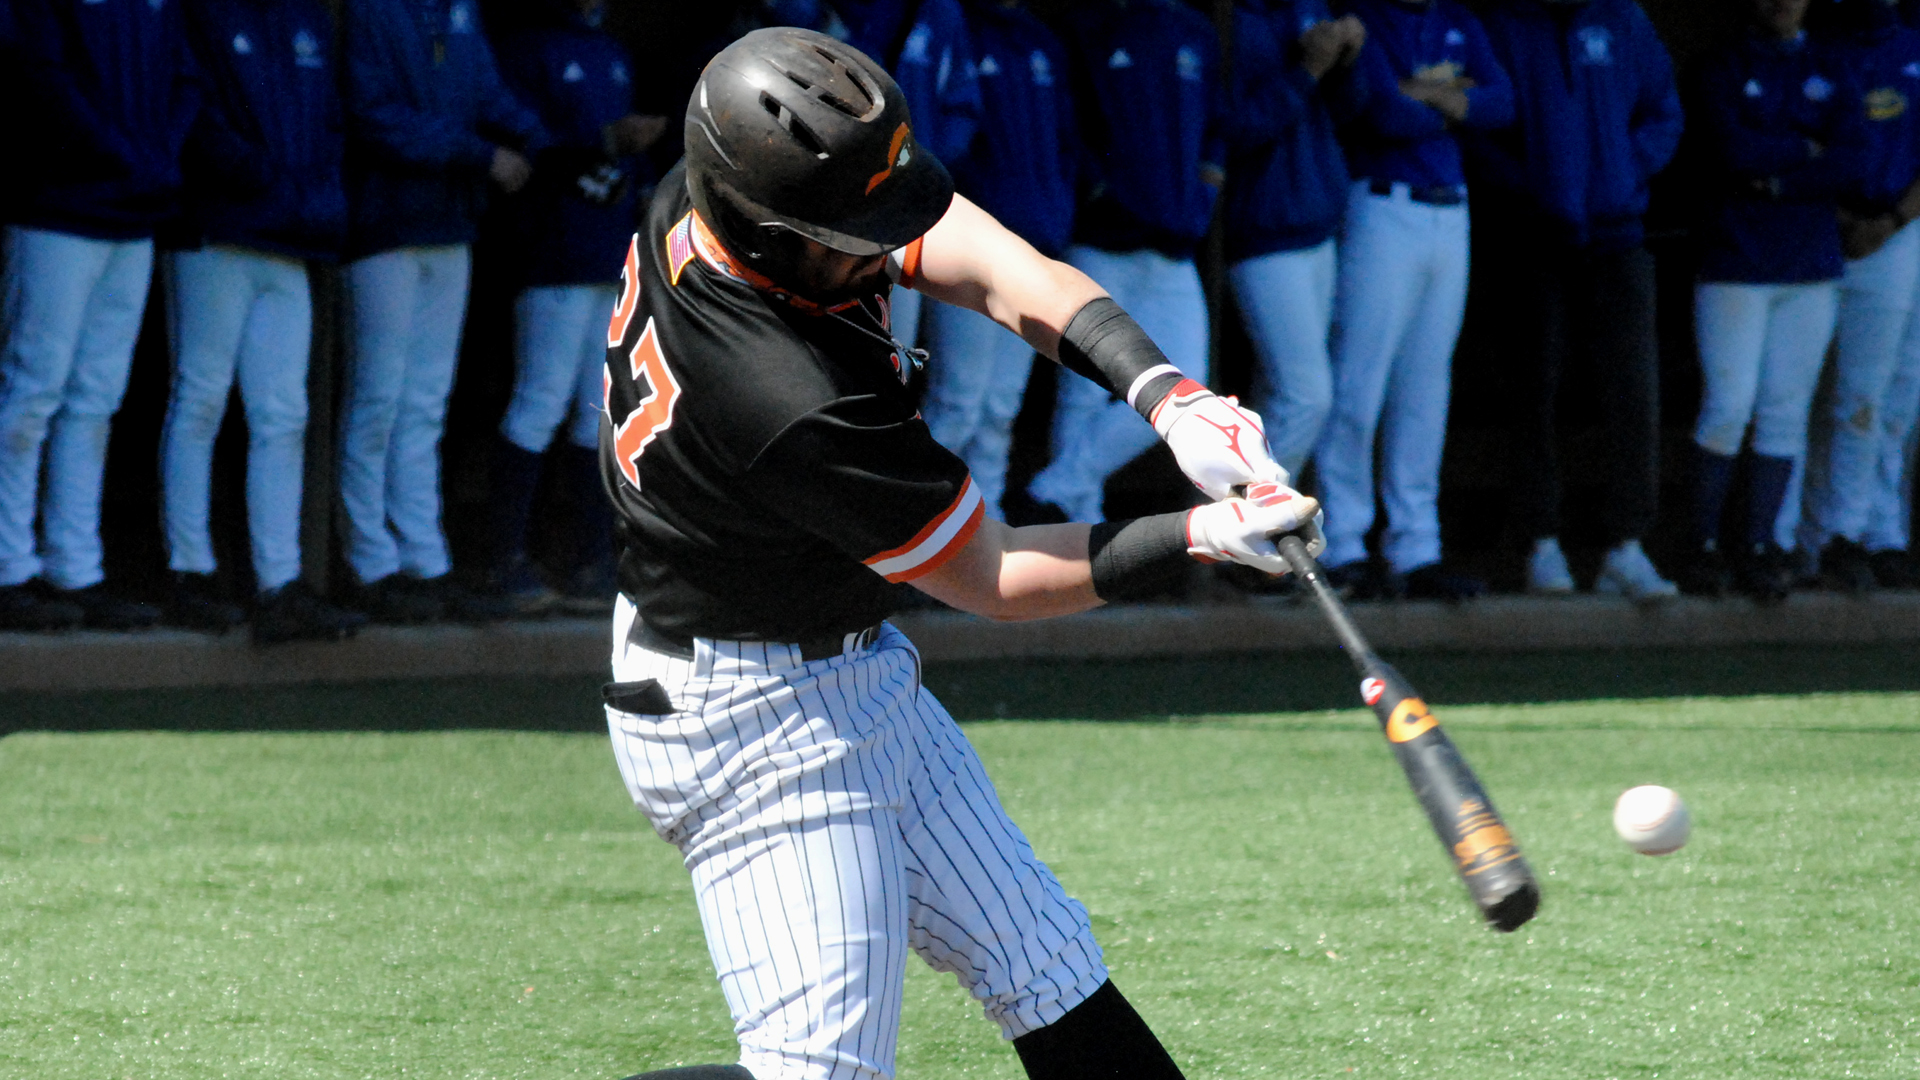 Fuzzy Furry homered three times in Tusculum's sweep over Mars Hill Saturday (photo by Steven Lloyd)